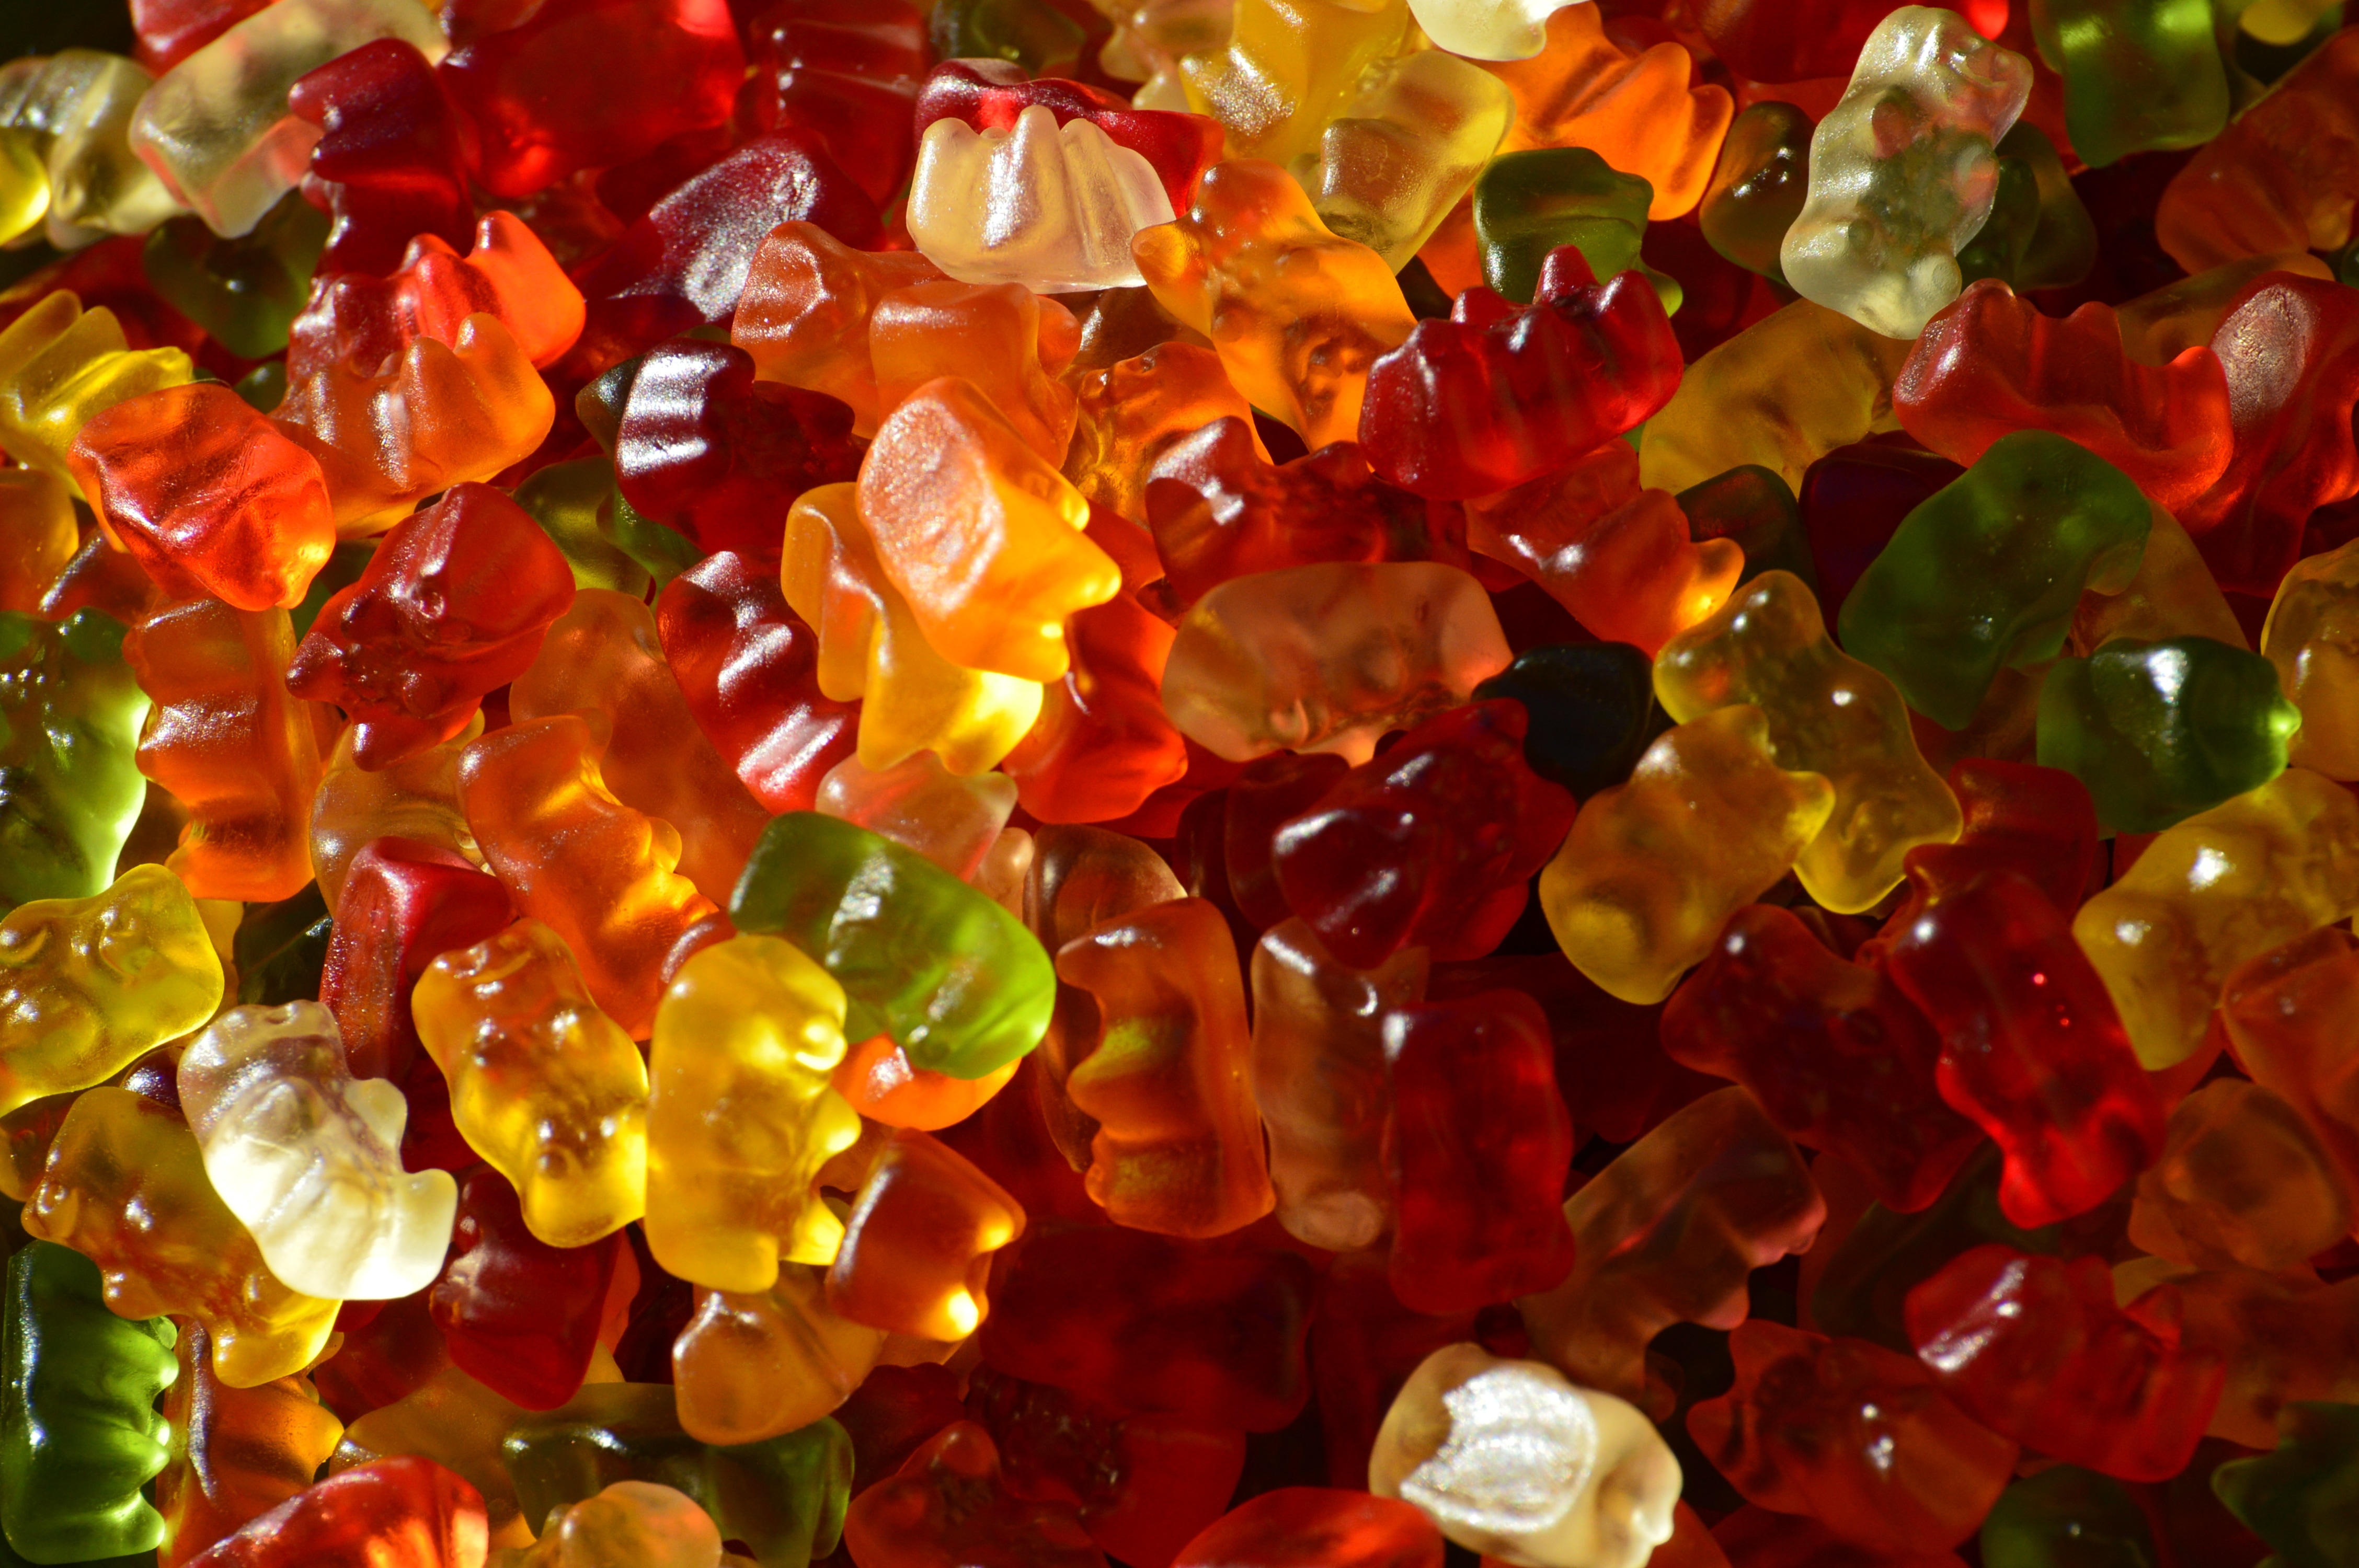 bear jelly candies